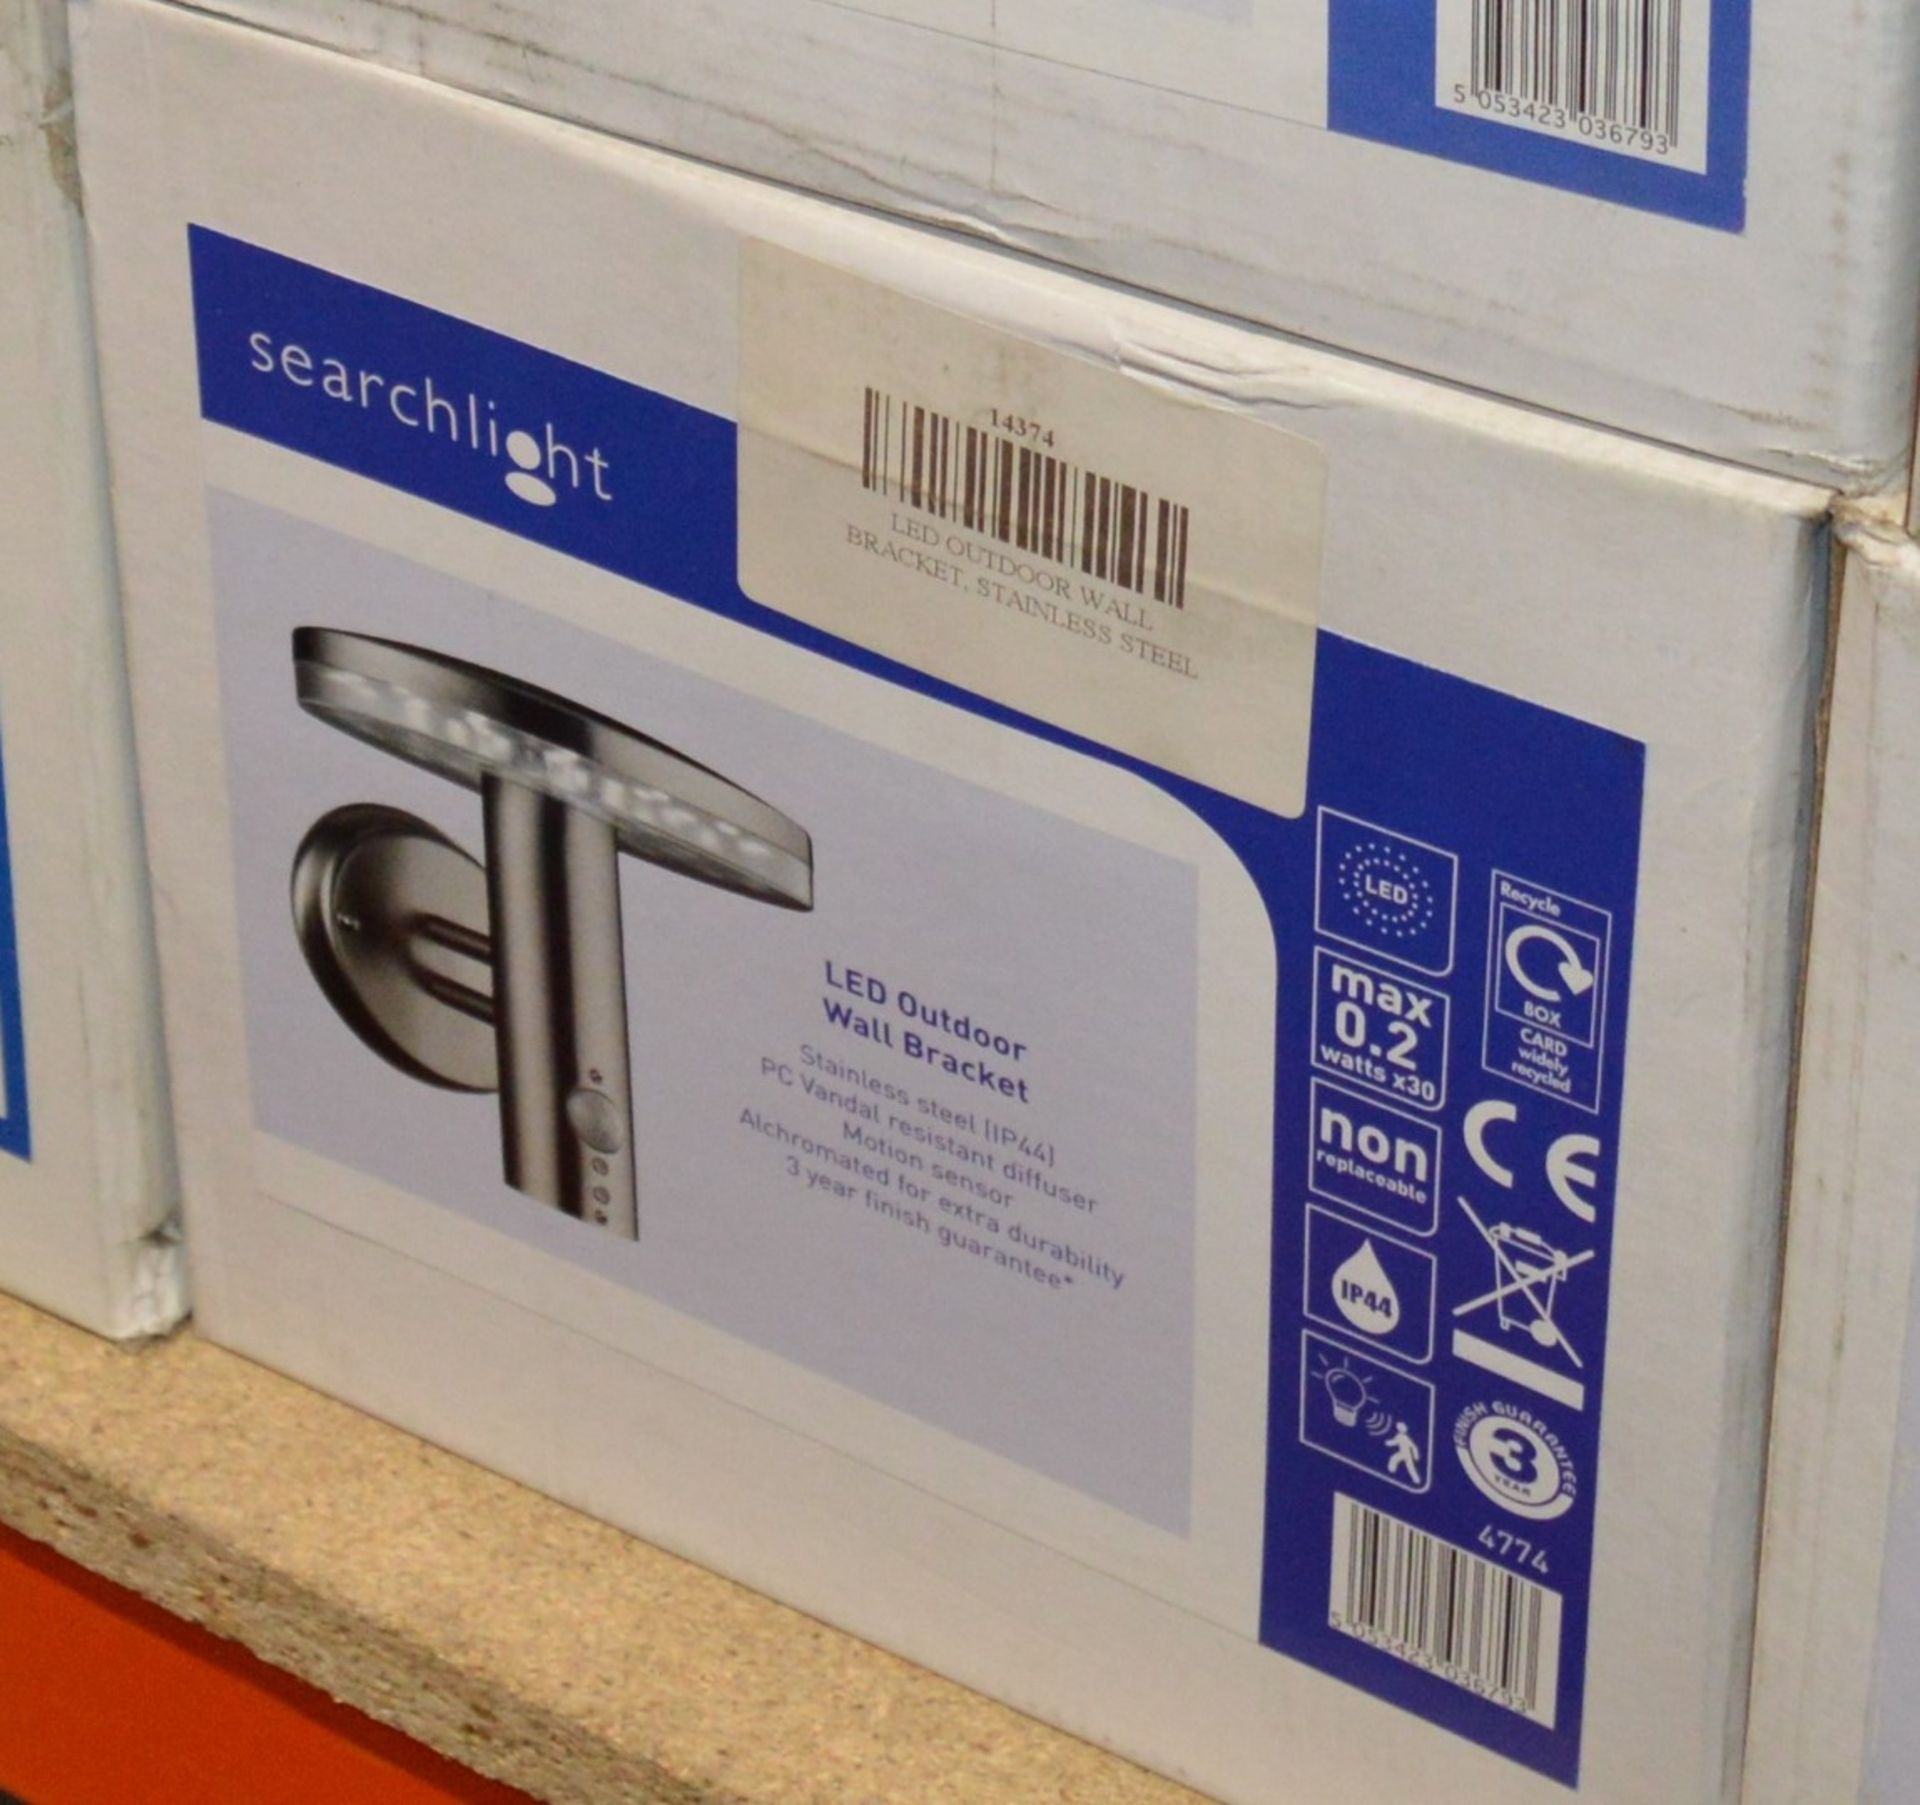 1 x SearchlightOutdoor LED Wall Light in Brushed Chrome IP44 - Product Code 4774 - New Boxed Stock -